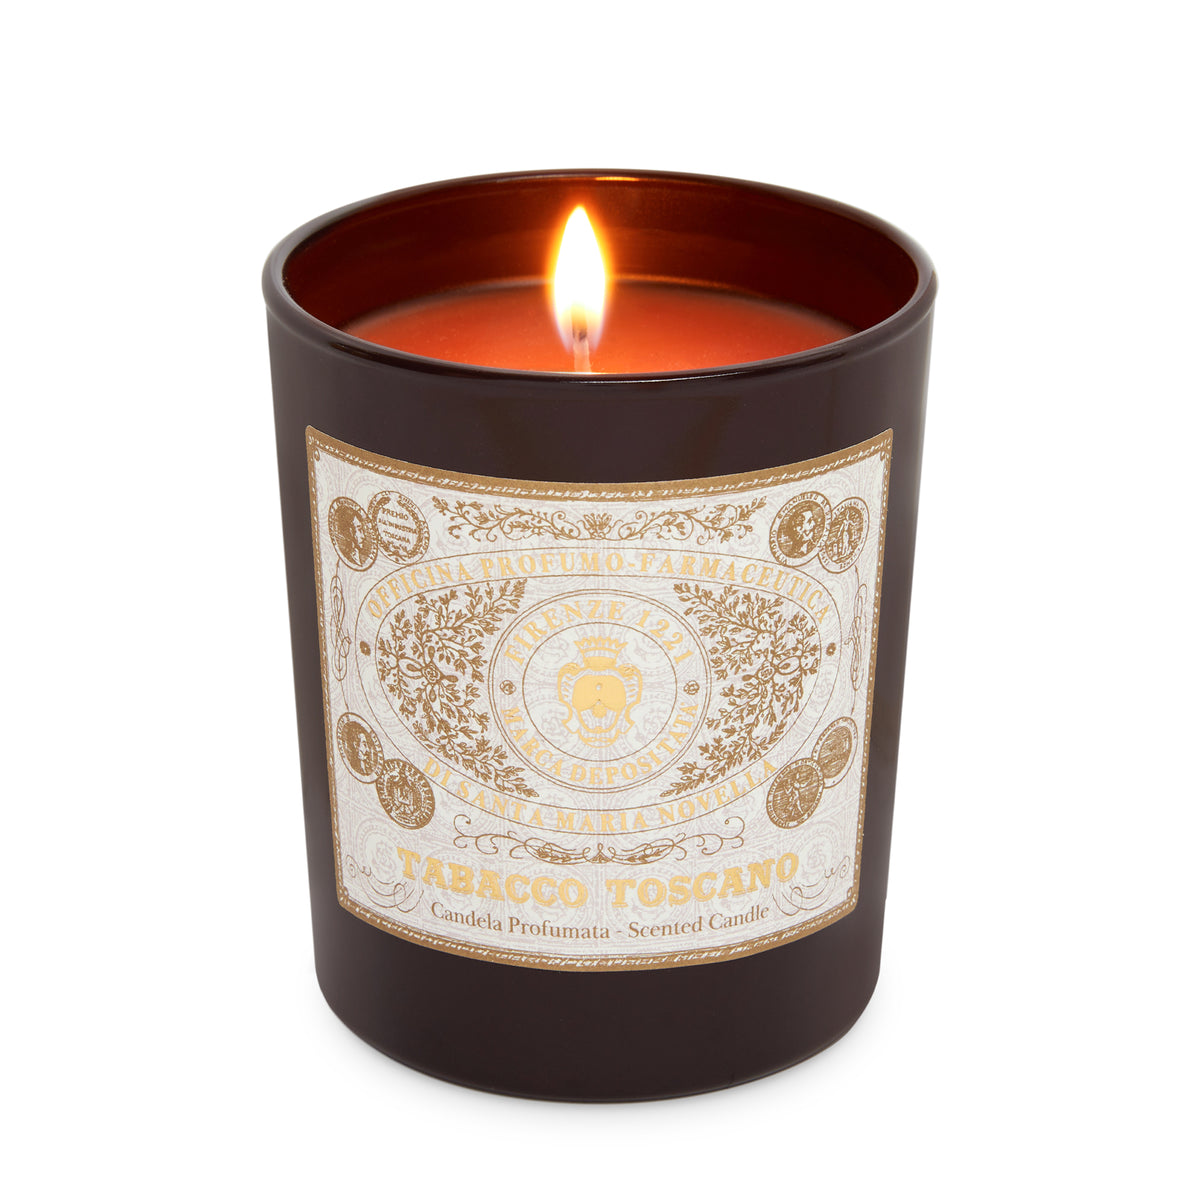 Primary Image of Tabacco Toscano Scented Candle